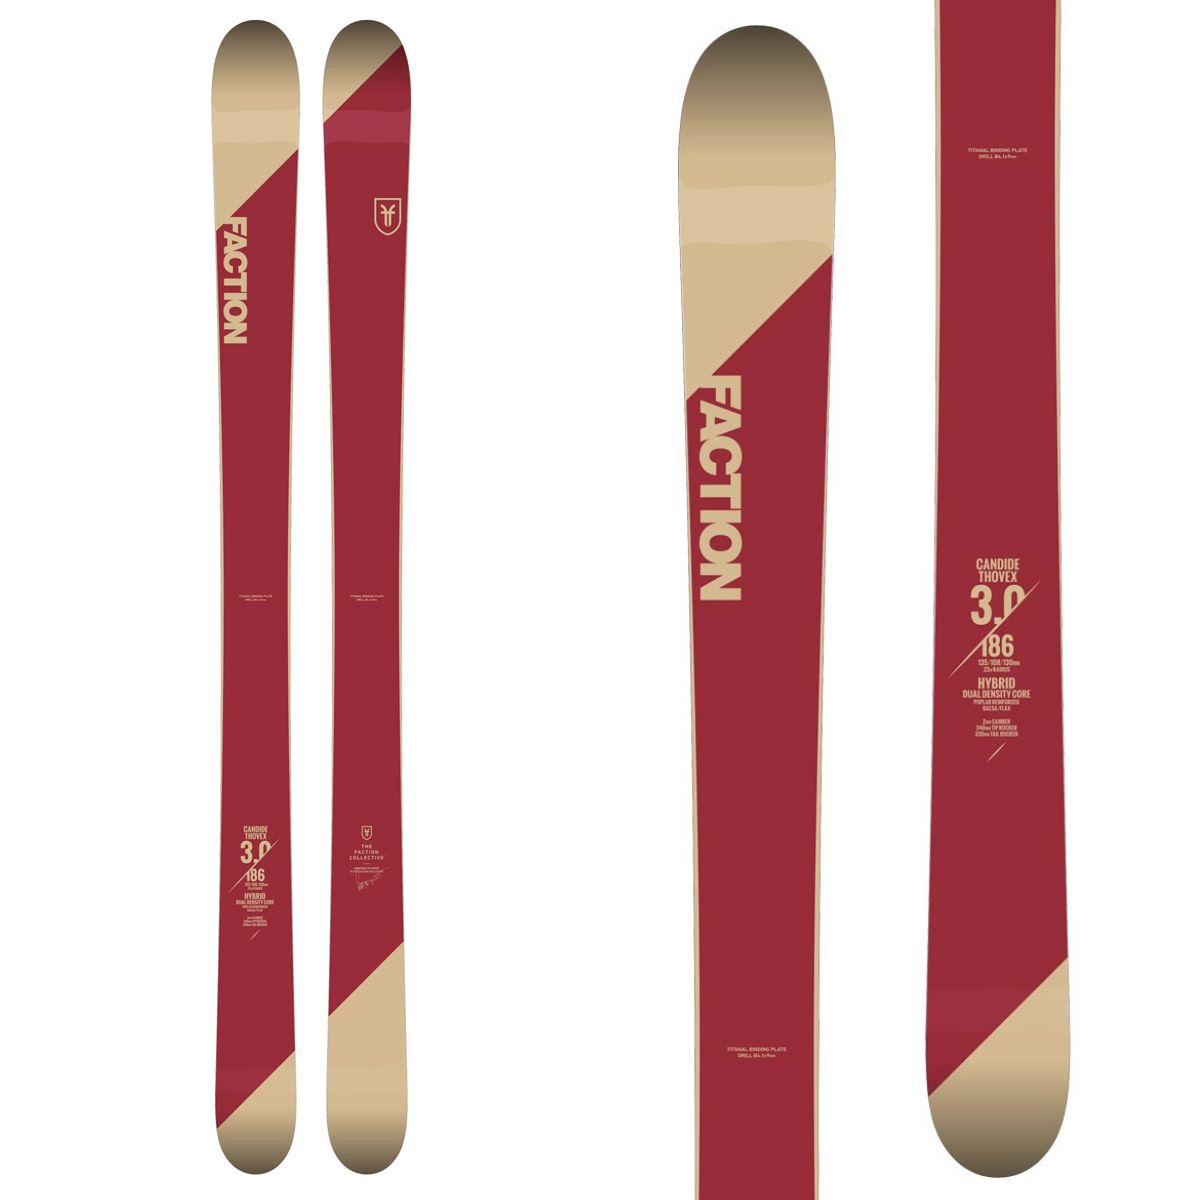 Skis Candide 3.0 2019